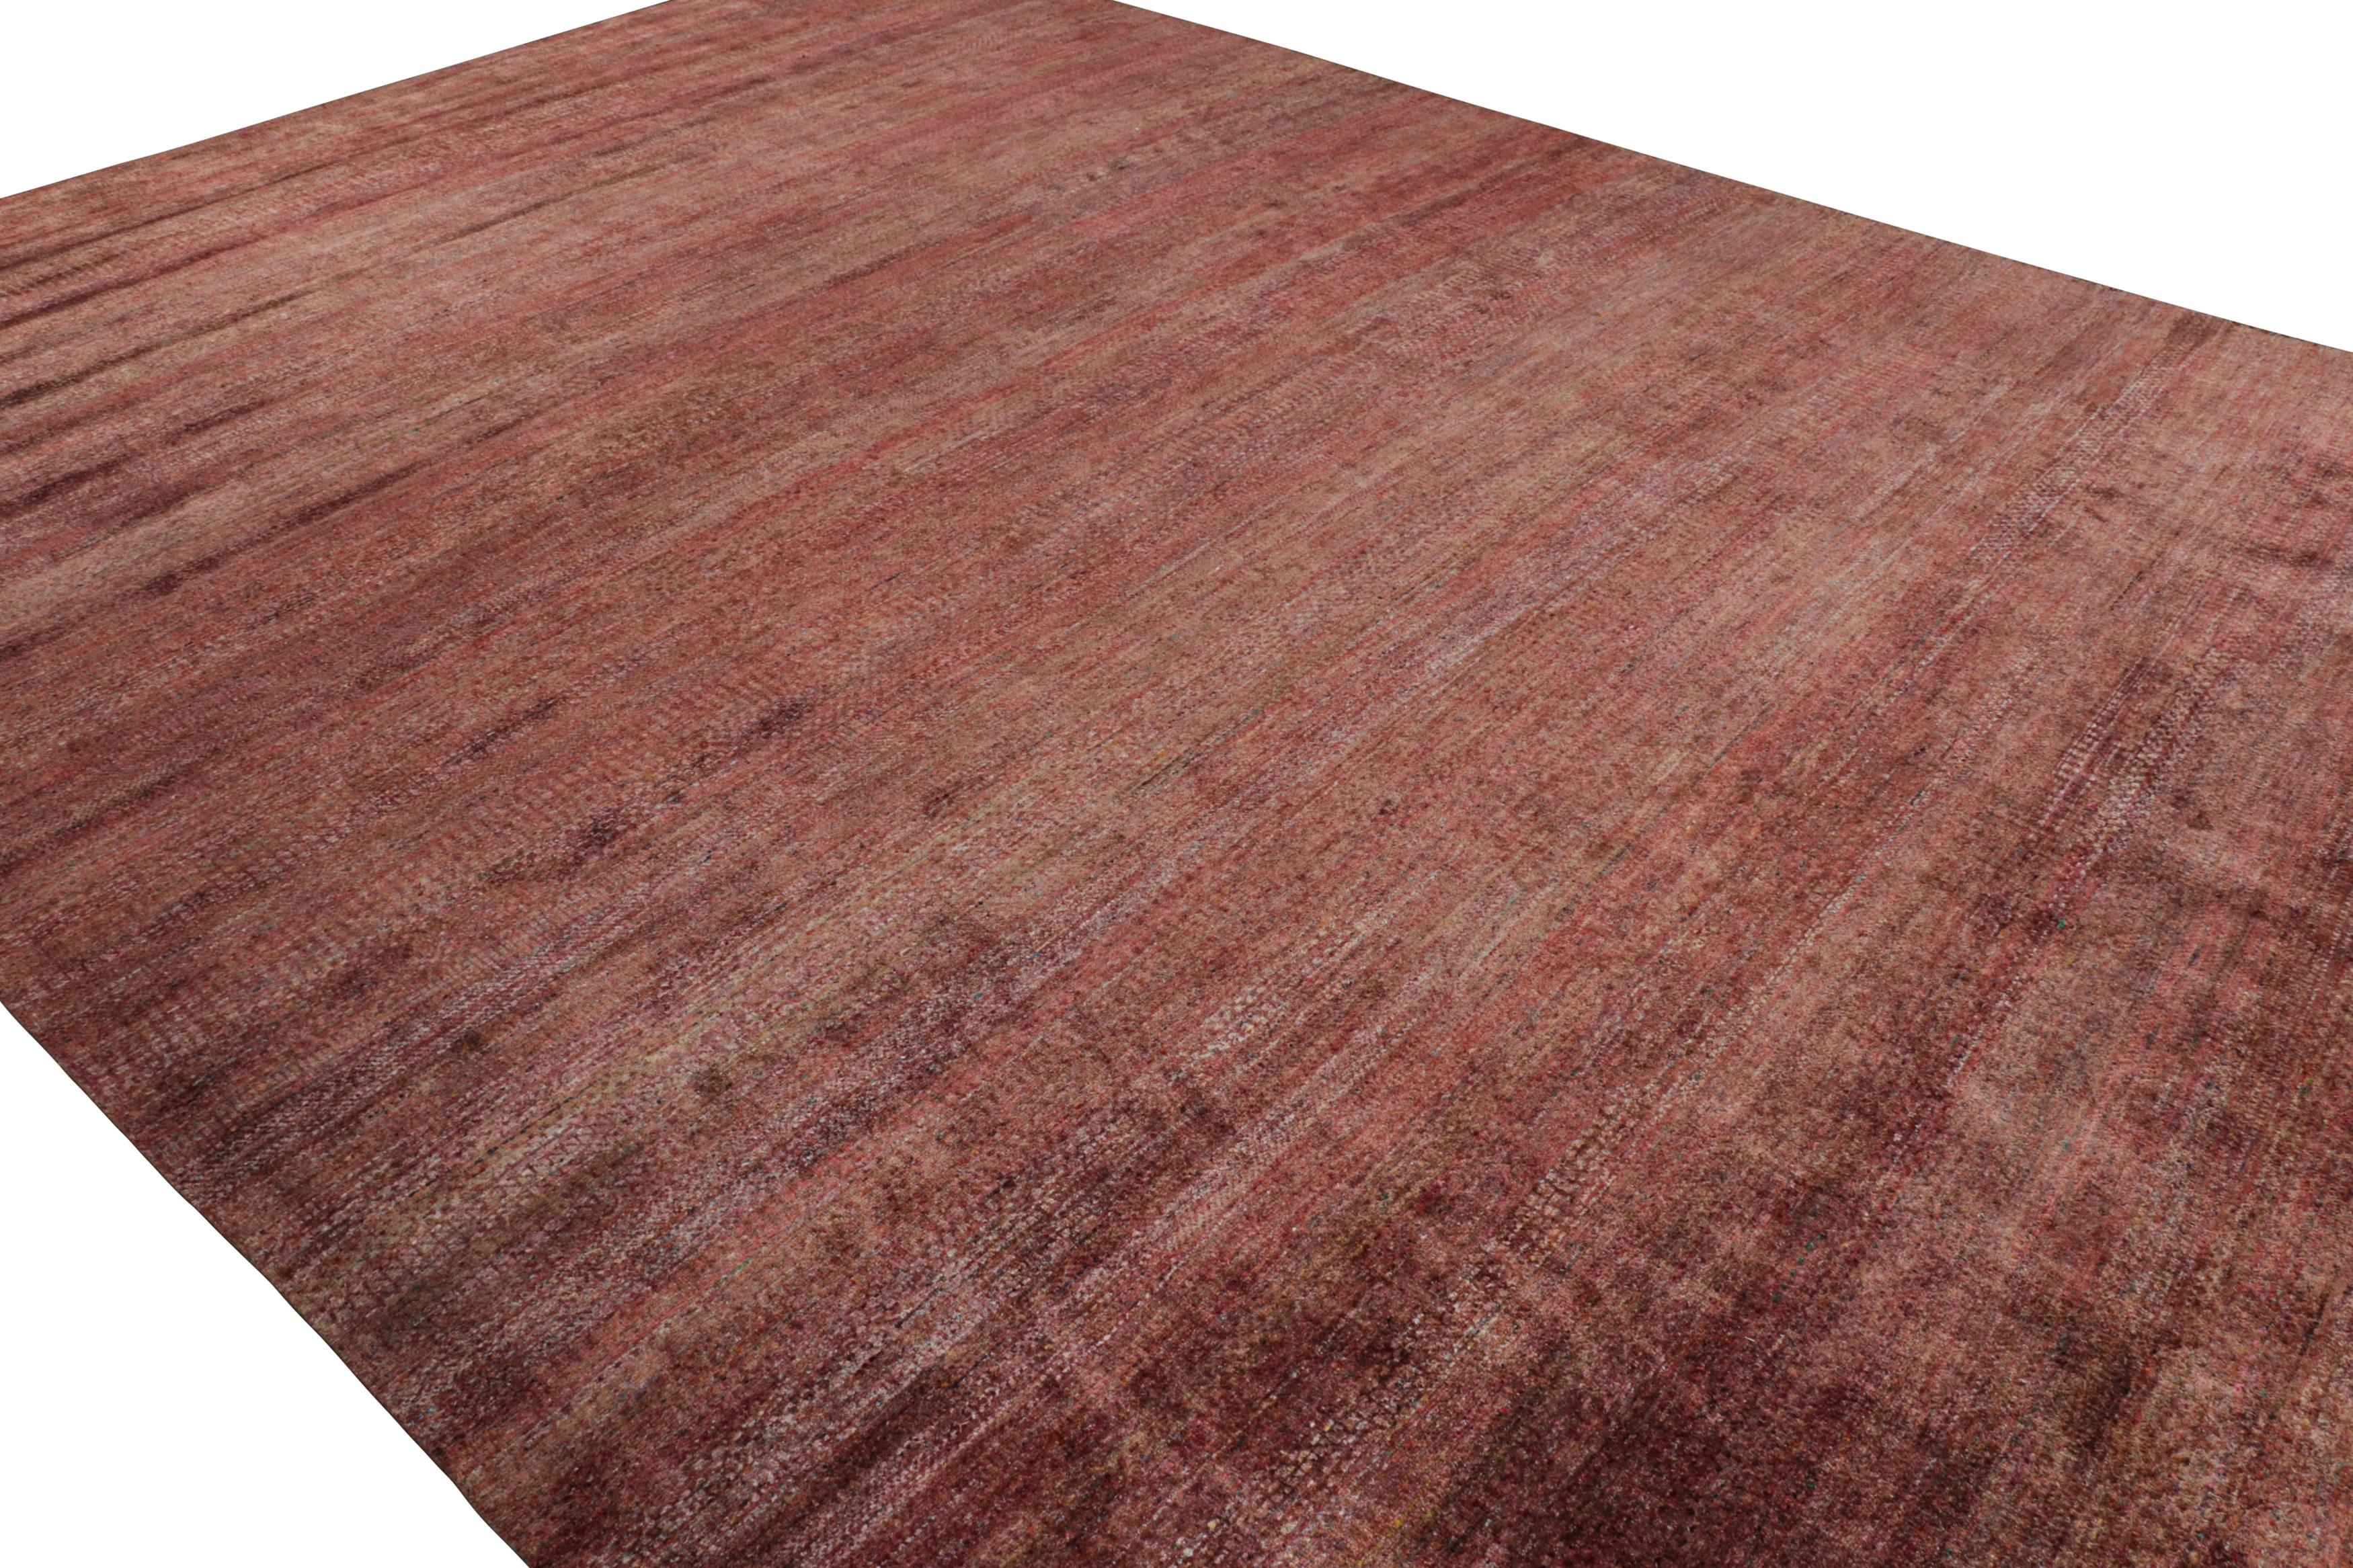 Rug & Kilim’s Modern Textural Rug in Red Tones and Striae In New Condition For Sale In Long Island City, NY